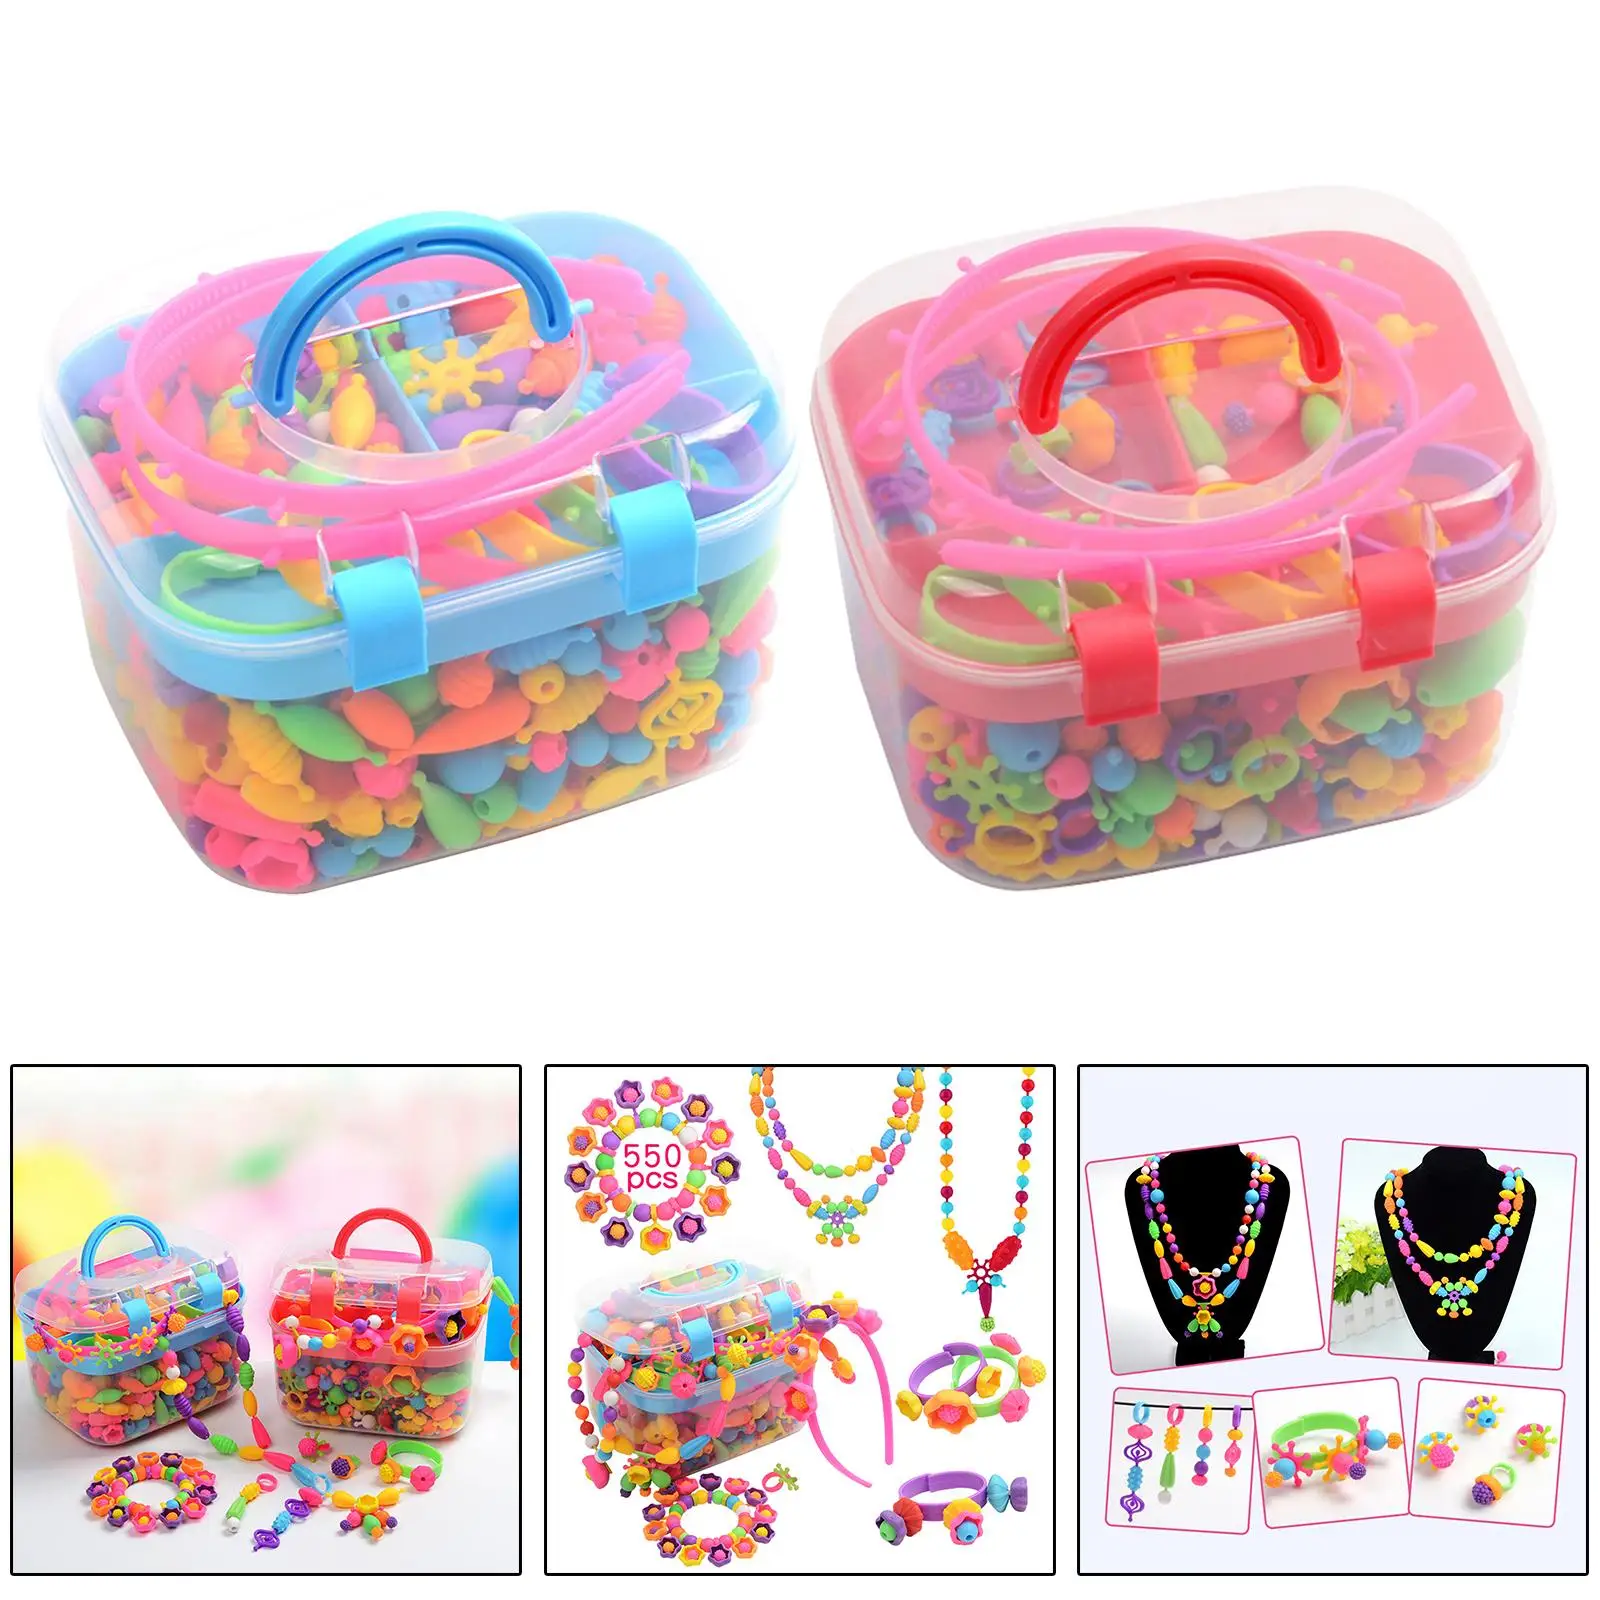 550pcs Pop Beads Jewelry Making Kit Jewelry Set Toys Arts Crafts Snap Together Beads for Earrings Necklace Bracelet Girls